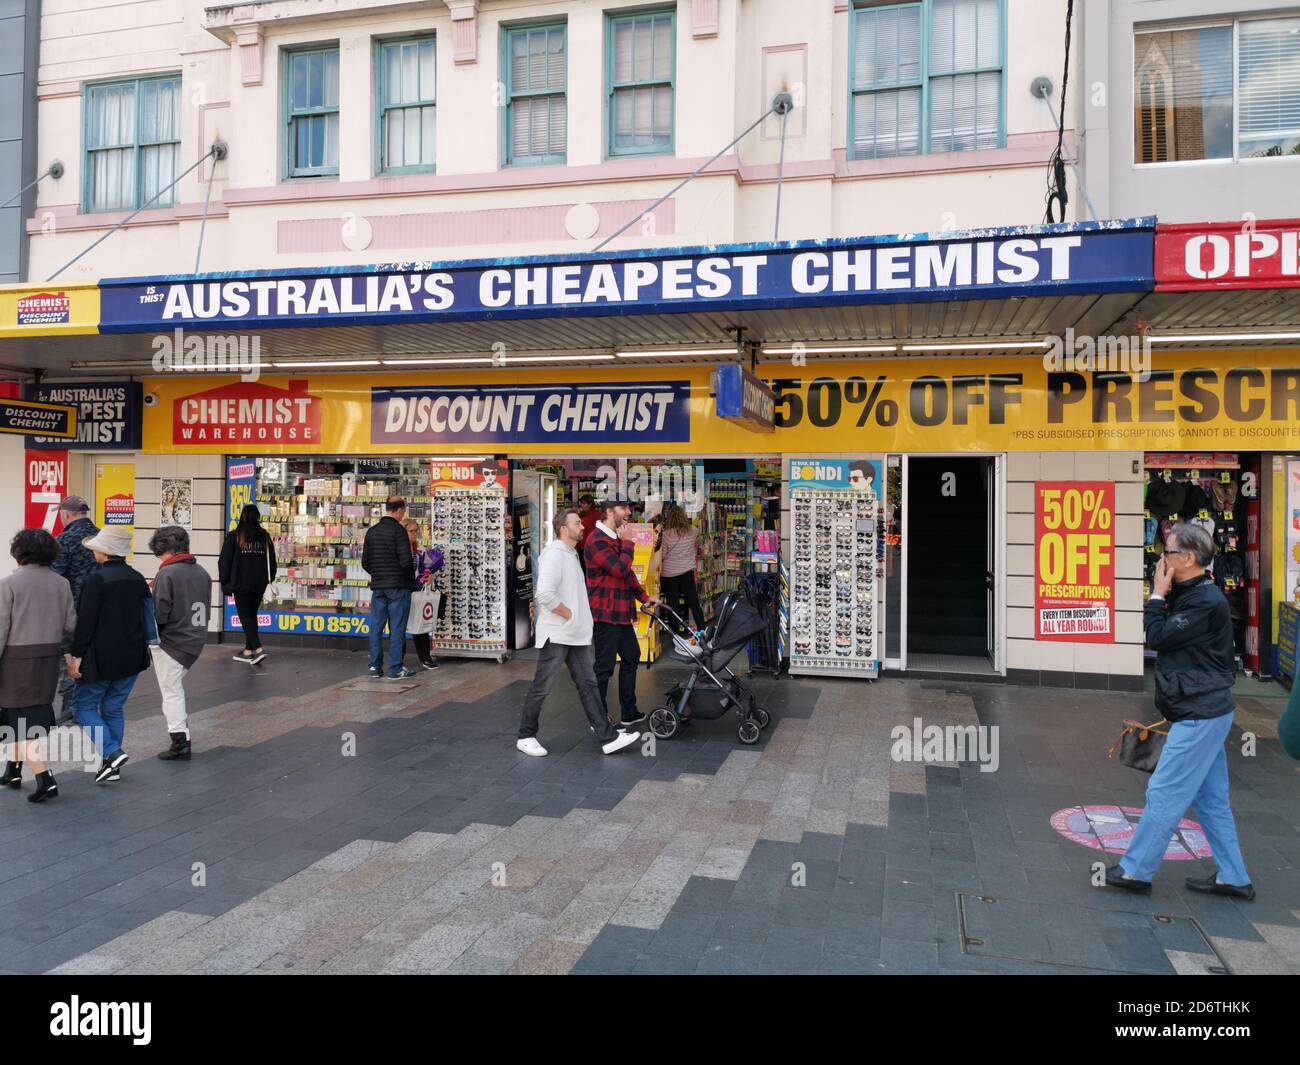 AUCKLAND, AUSTRALIA - May 11, 2019: Sydney / Australia - May 11 2019: View of Discount Chemist Warehouse shop at Manly Beach Stock Photo